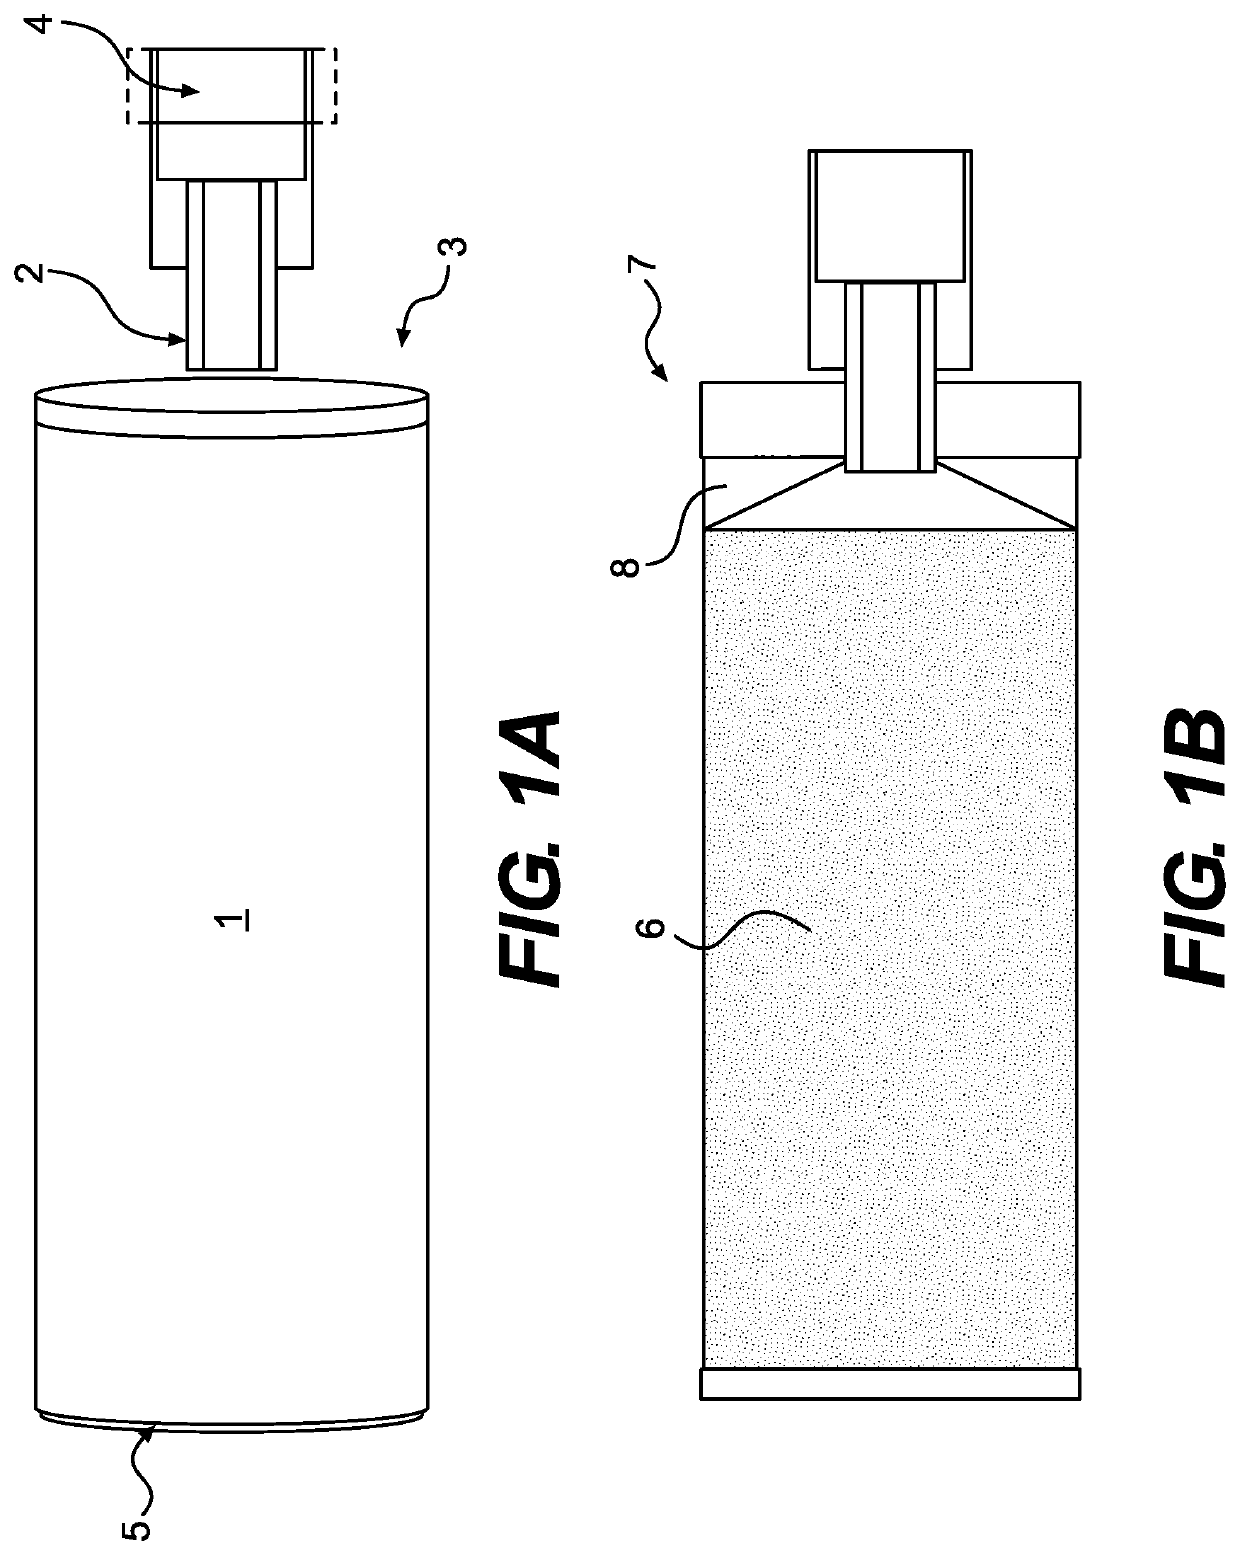 Packaging assembly for storing tissue and cellular material